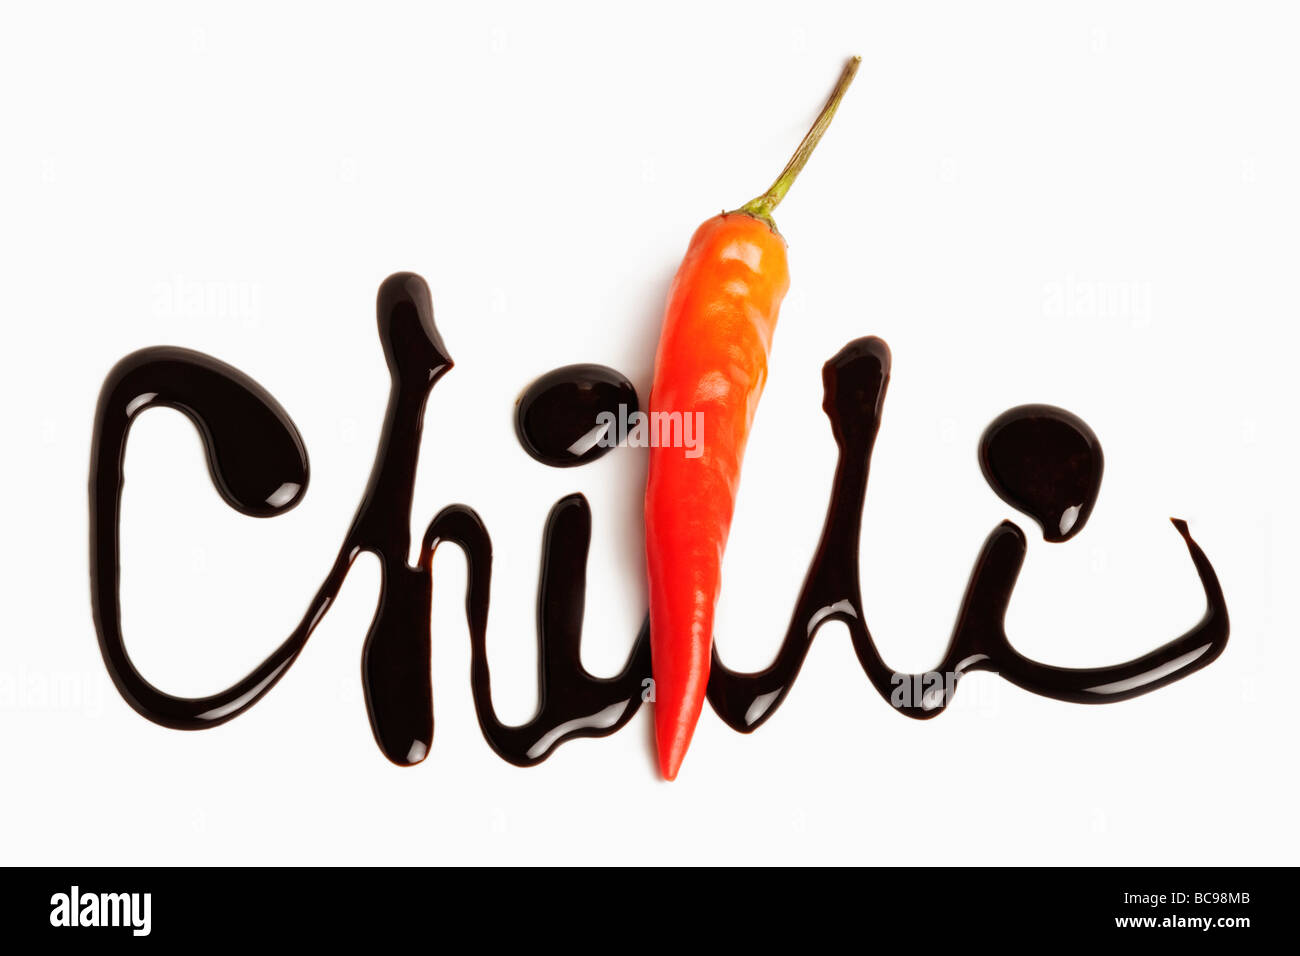 The word chilli written in chocolate Red chilli used as part of the word Against white background Stock Photo